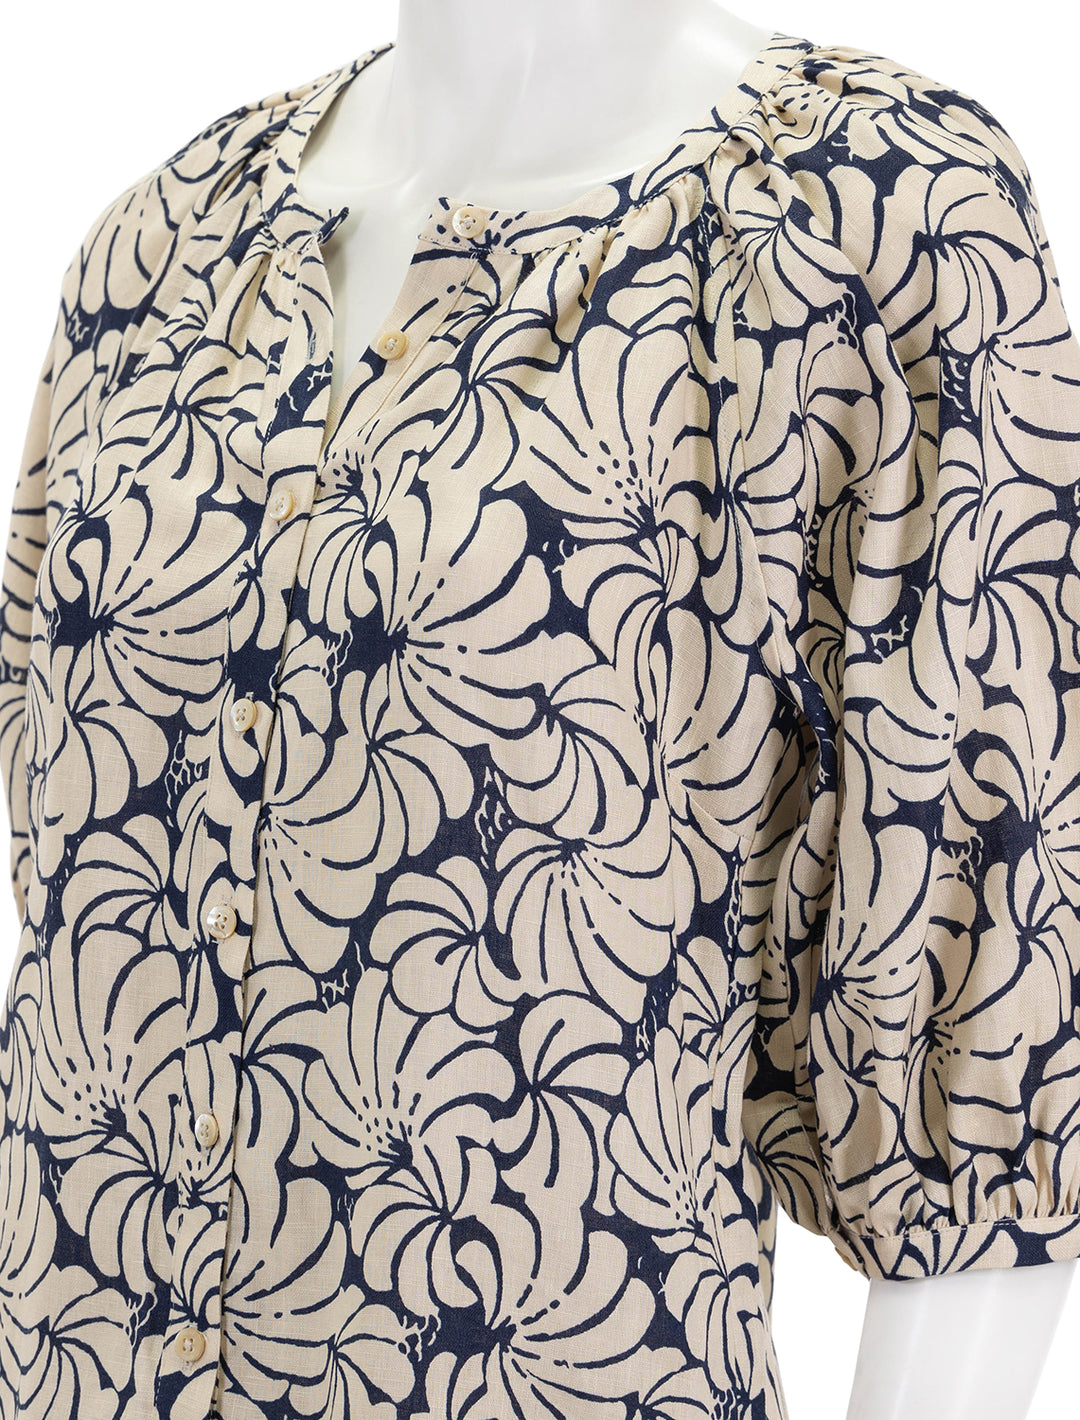 Close-up view of STAUD's mini vincent dress in navy scallop block print.